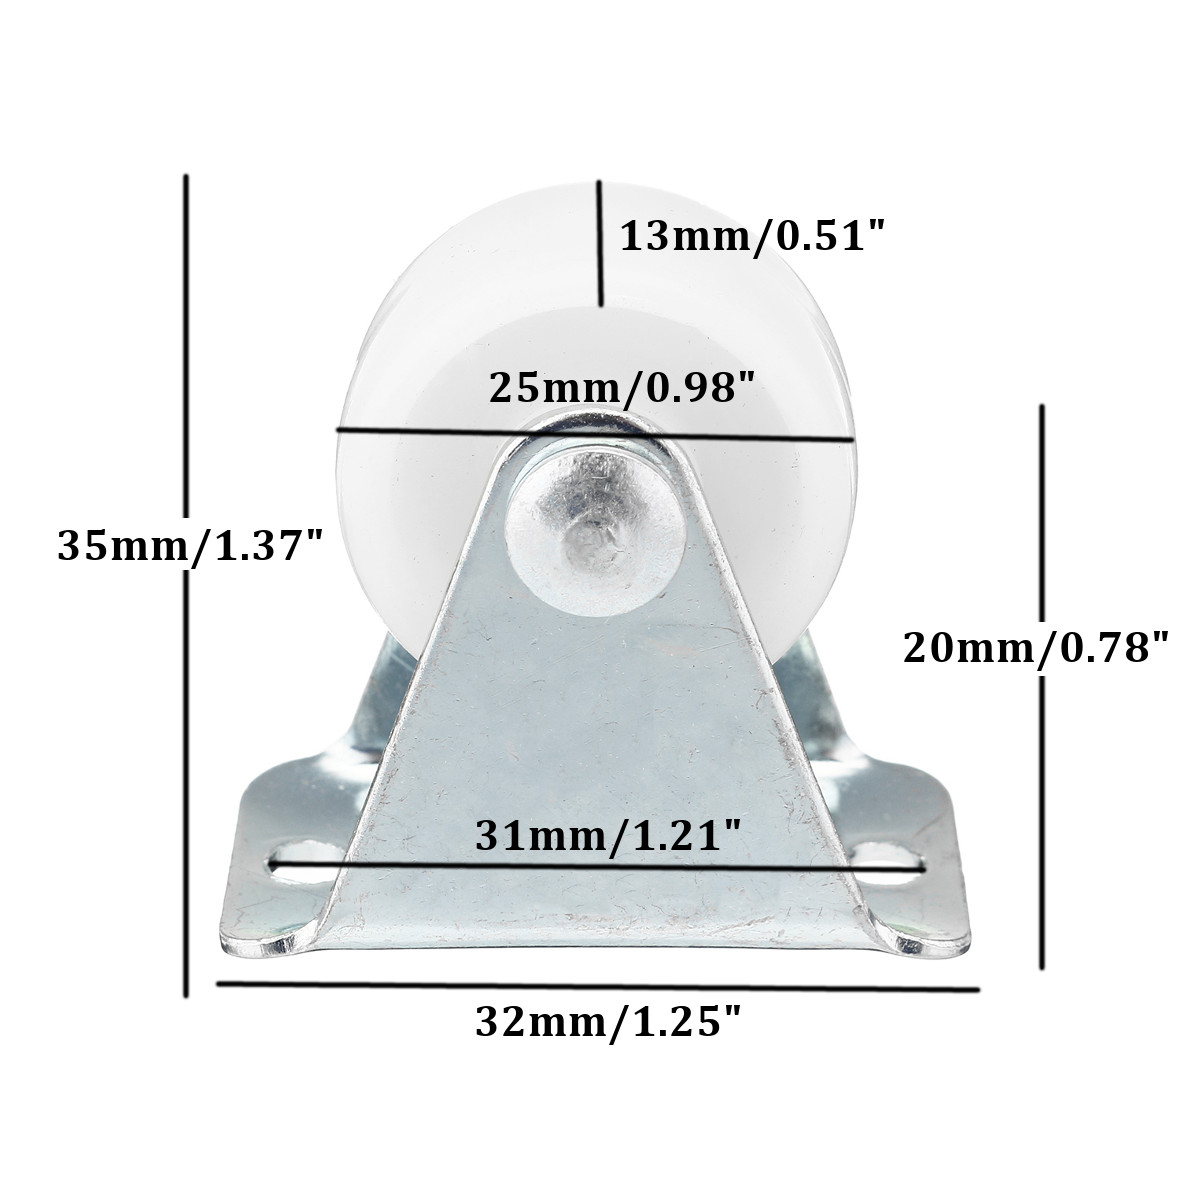 Fixed-Caster-Wheels-1inch-PP-Top-Plate-Mounted-Caster-Wheel-22lbs-1554284